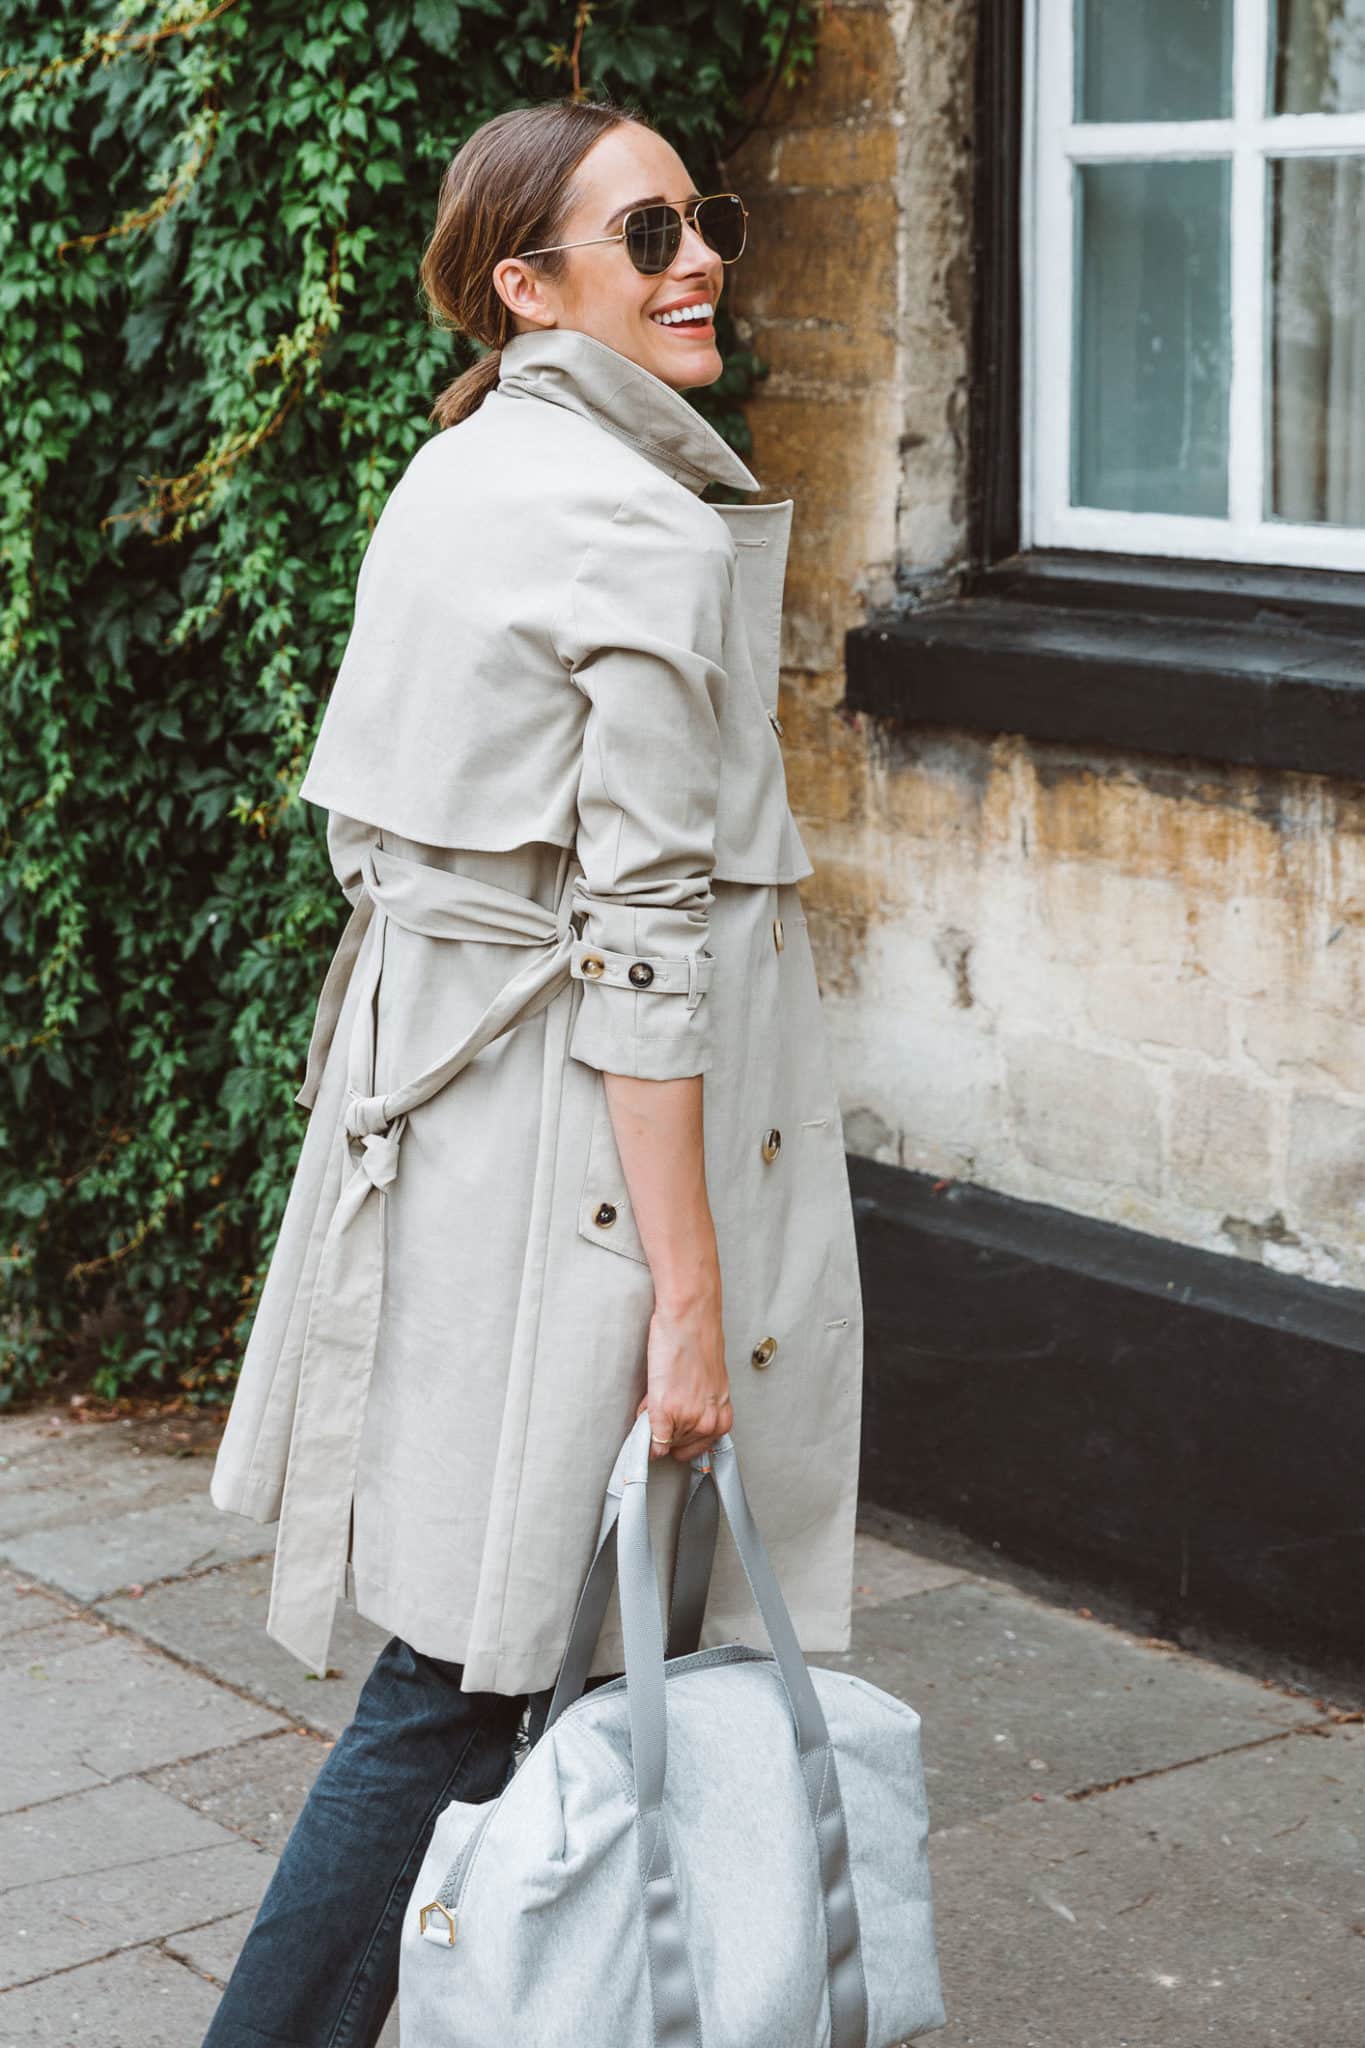 My Favorite Trench Coats Of 2018 - Front Roe by Louise Roe